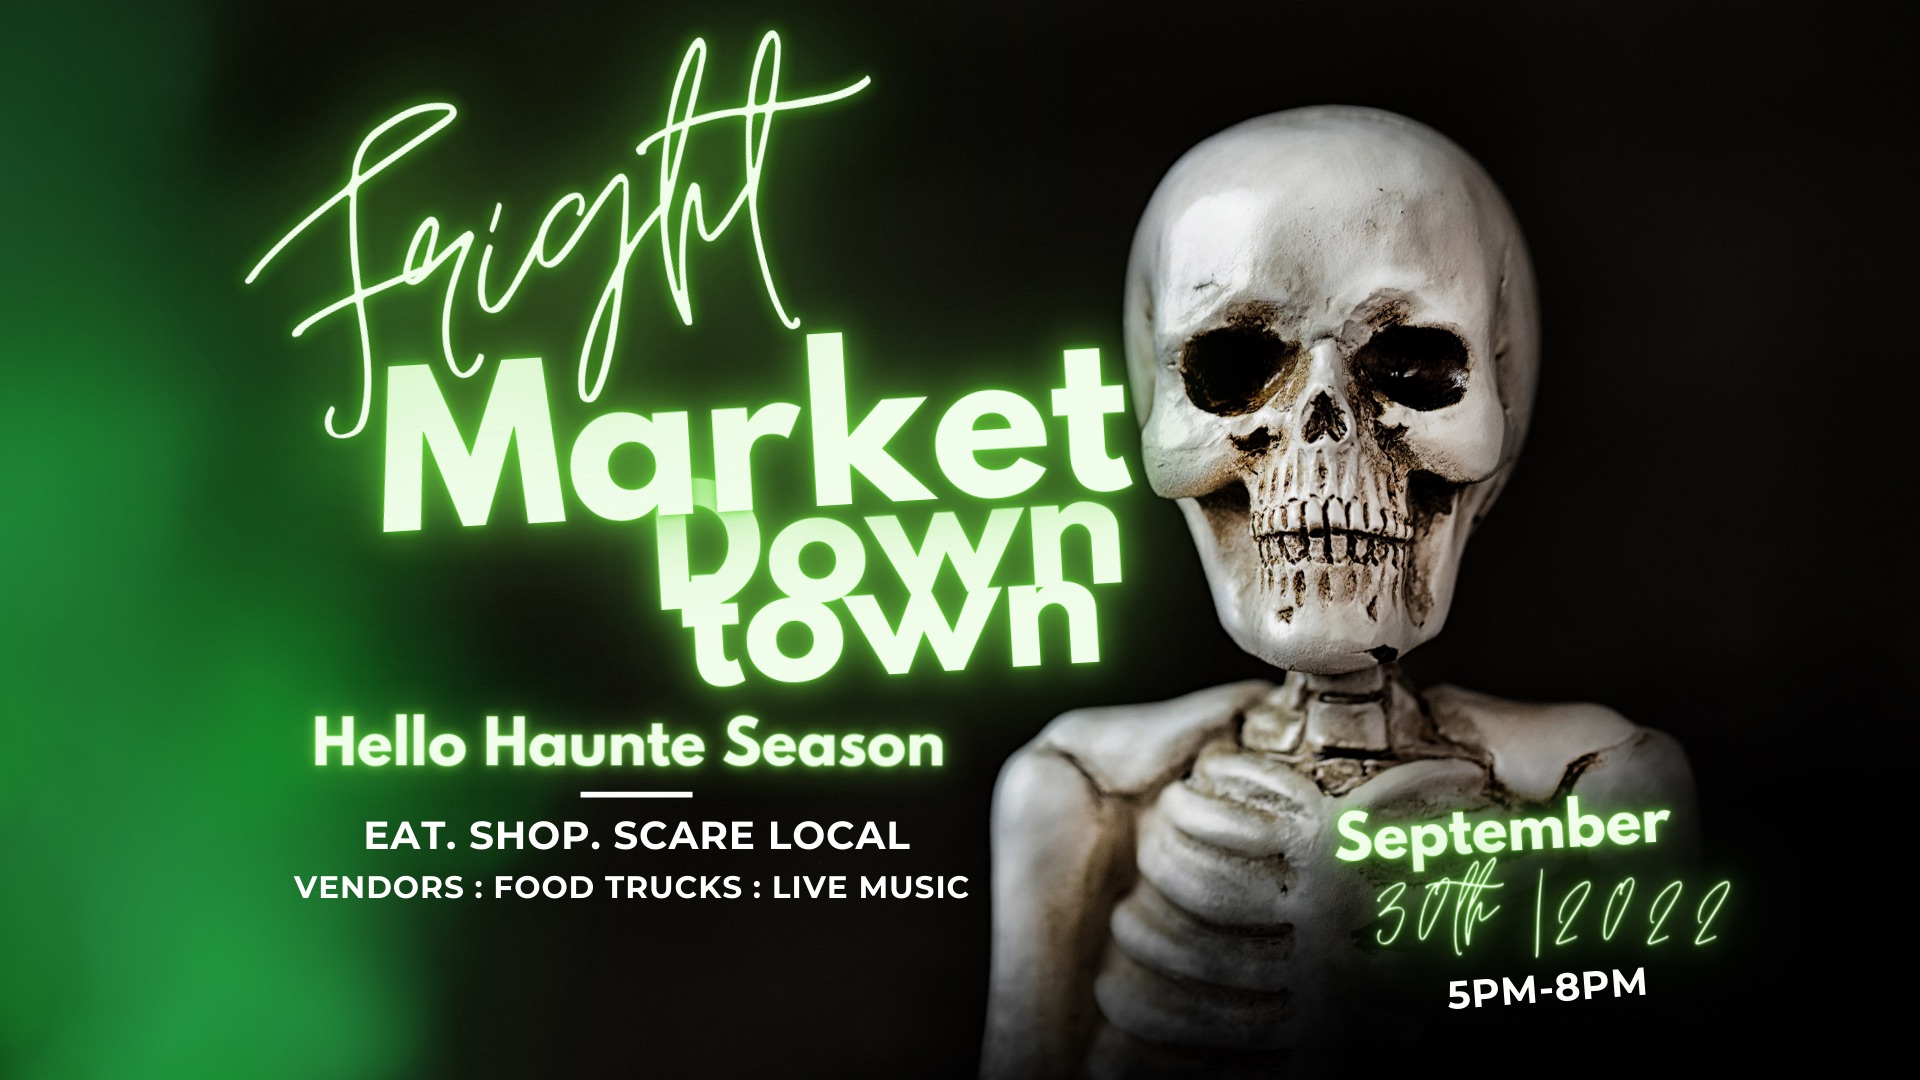 Downtown Fright Market 